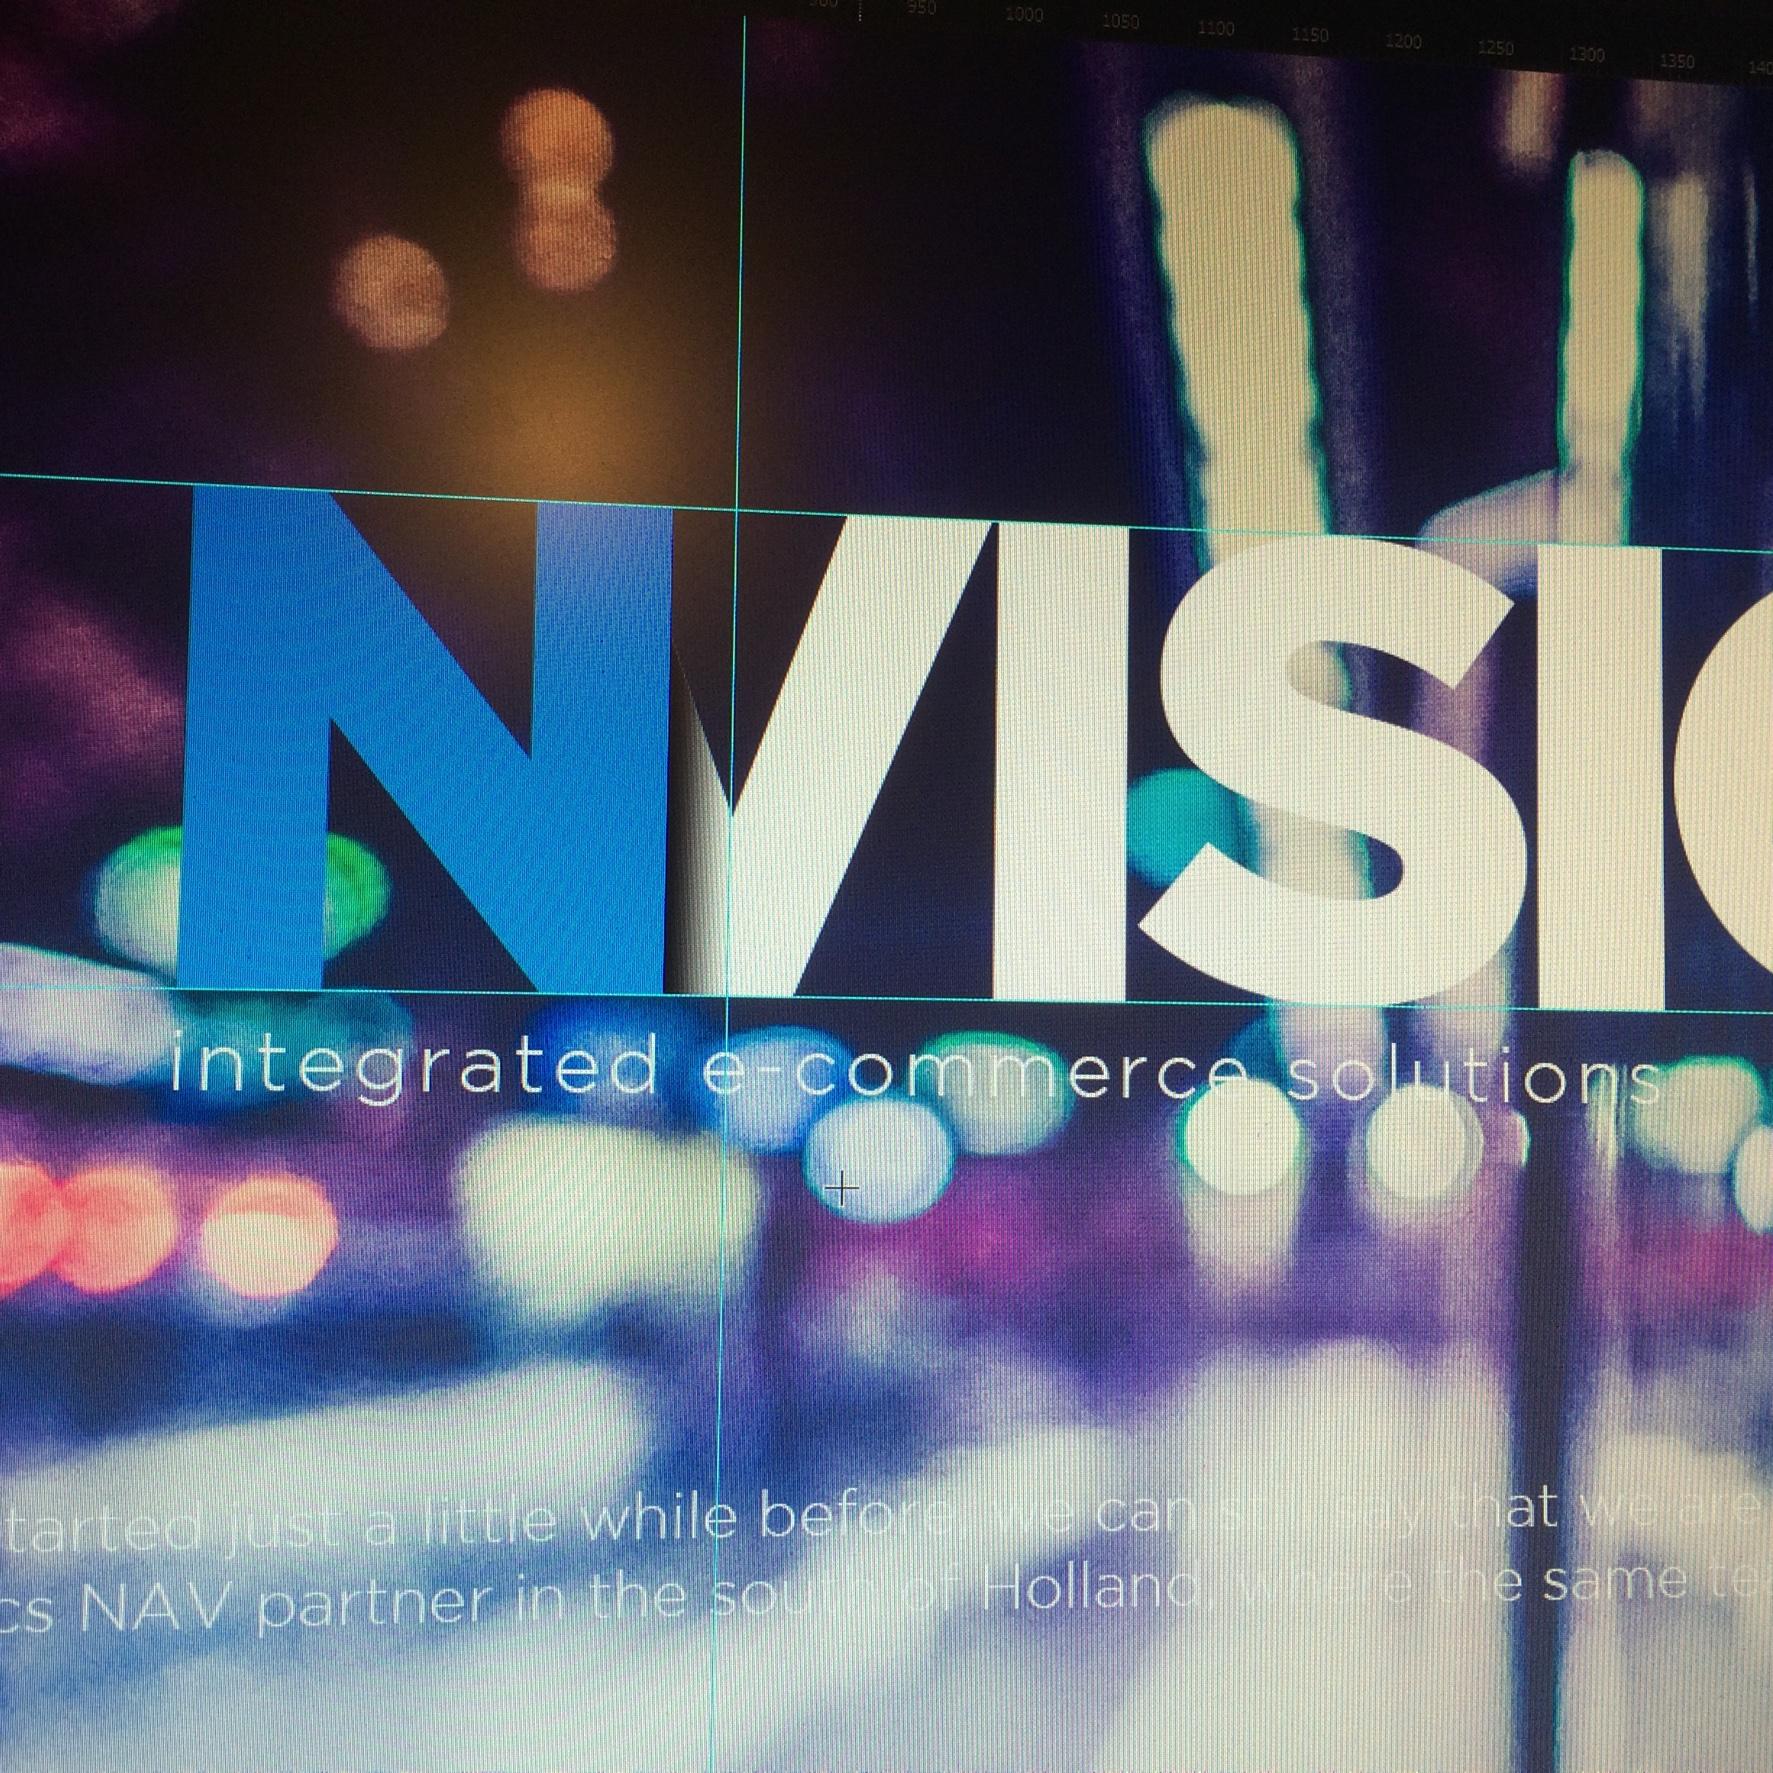 NVision